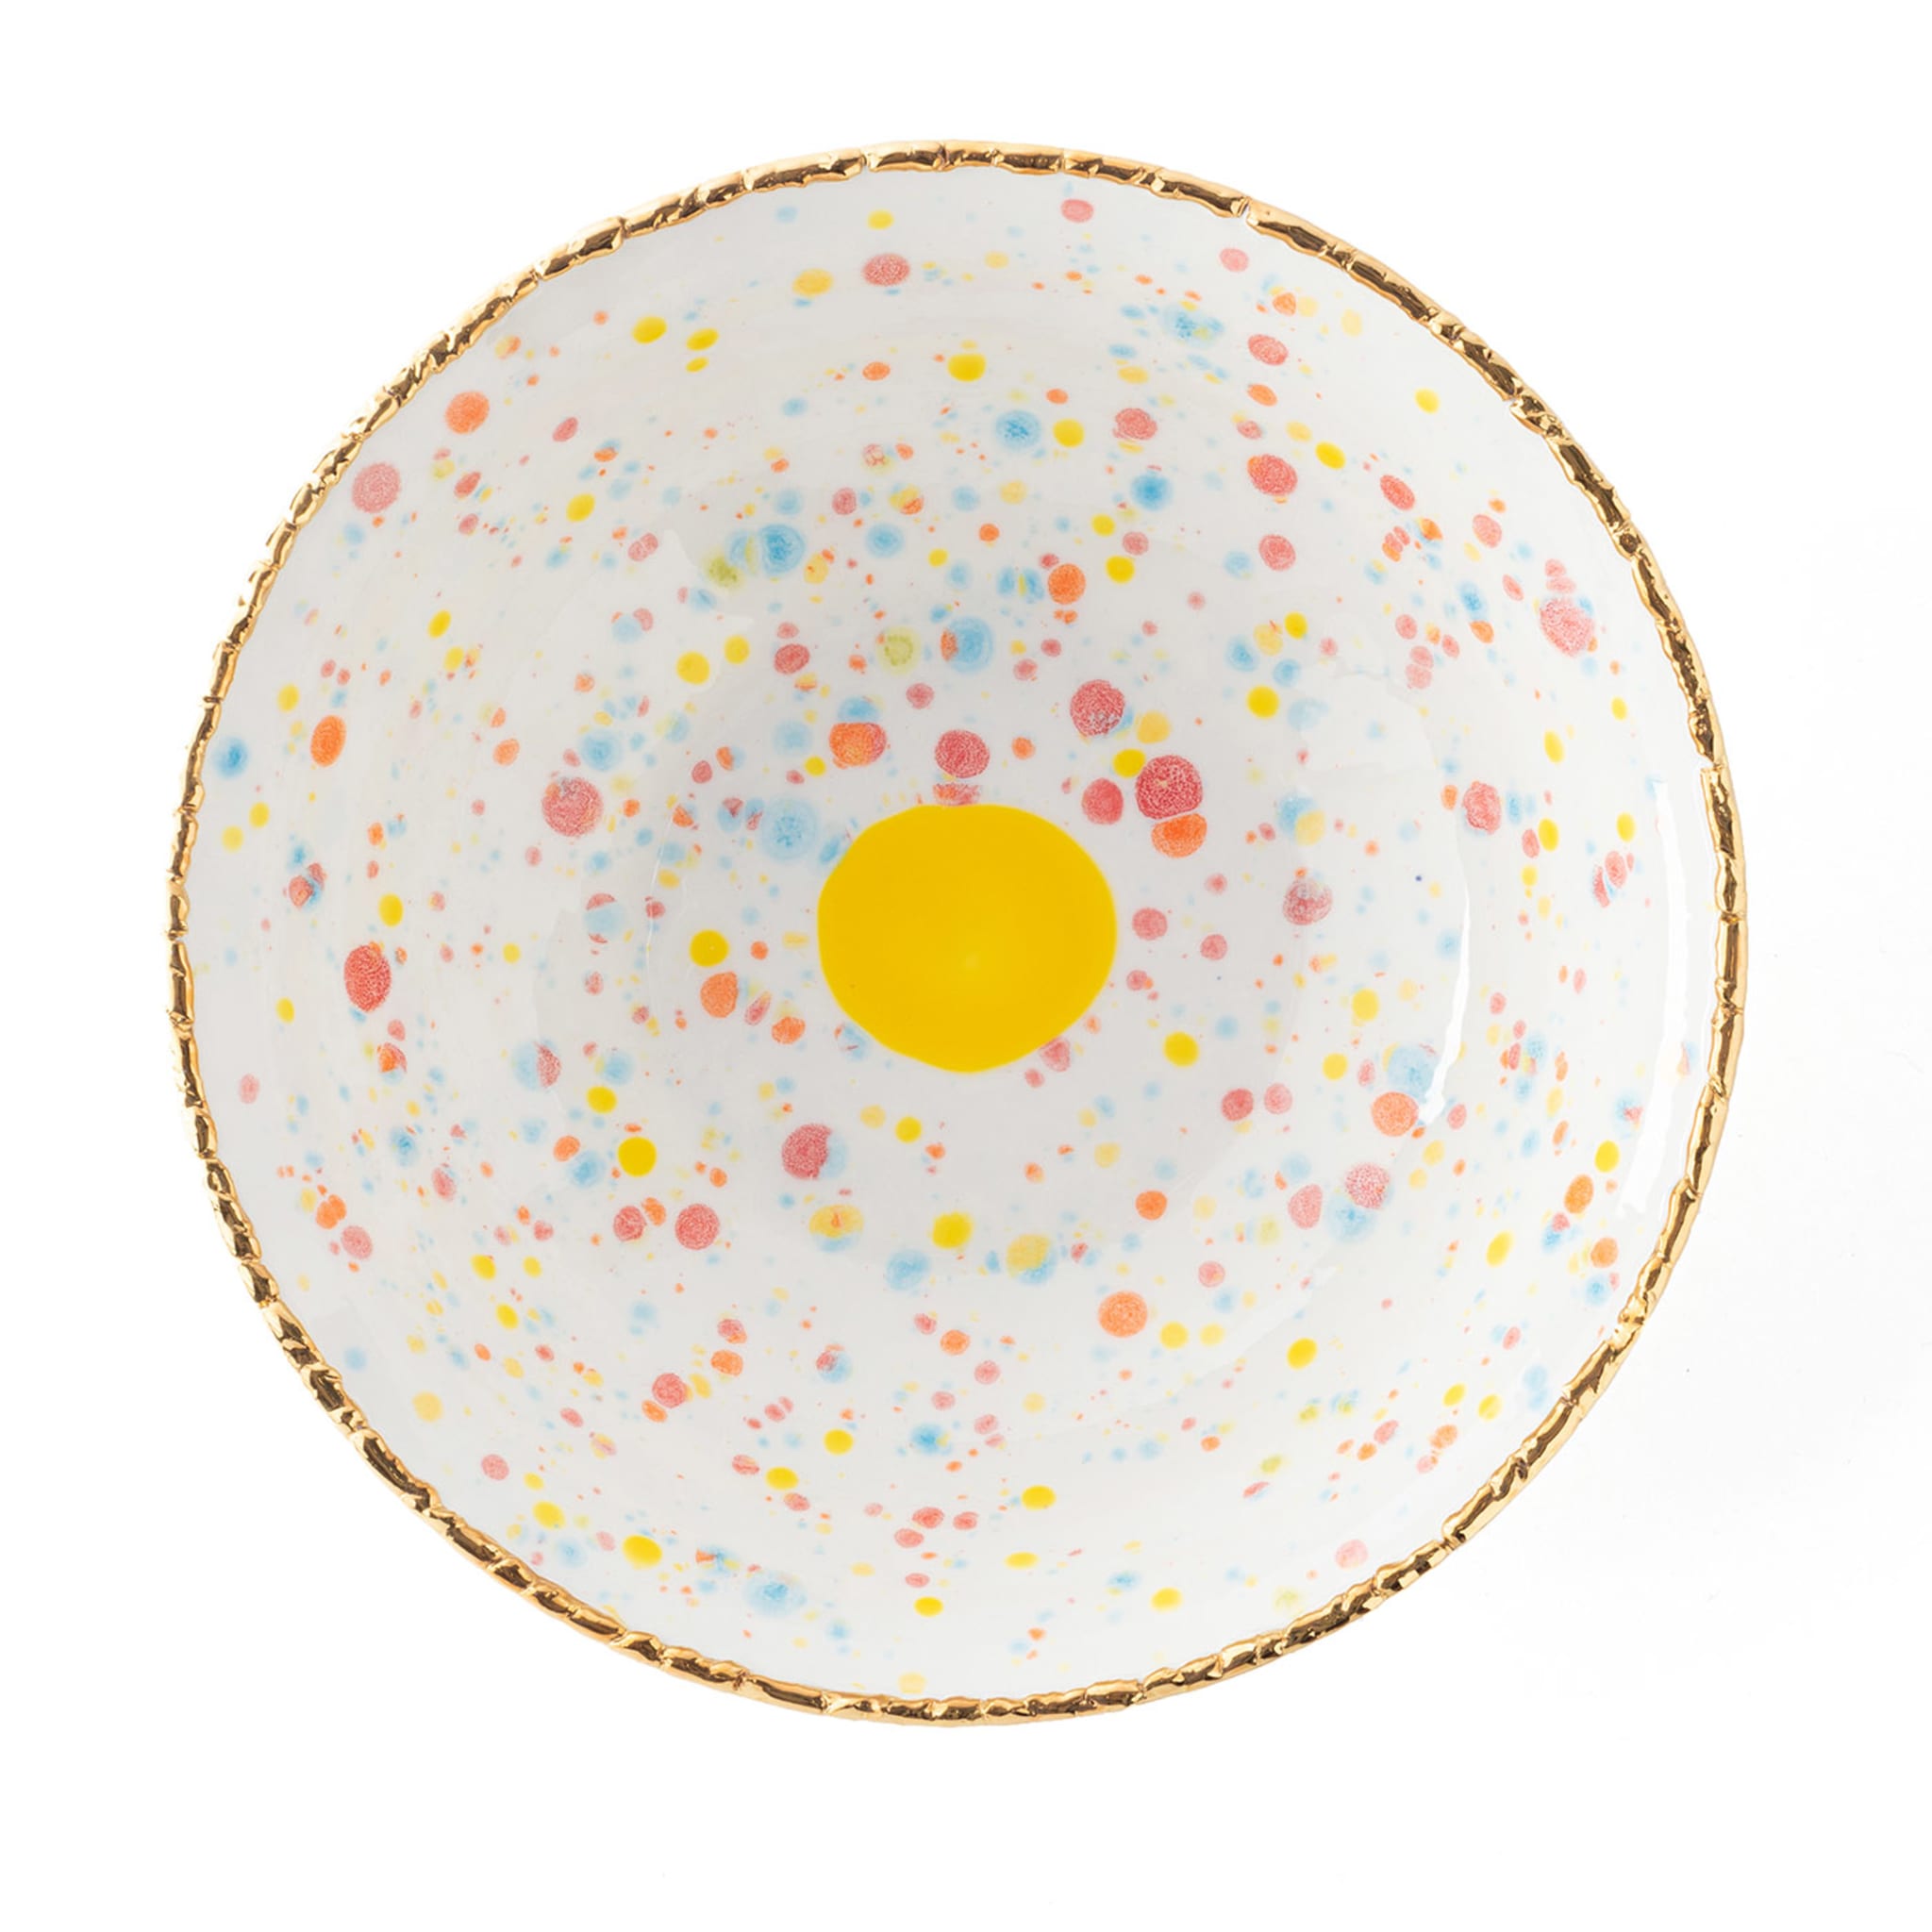 Confetti Small Salad Bowl with Crackled Rim - Alternative view 1